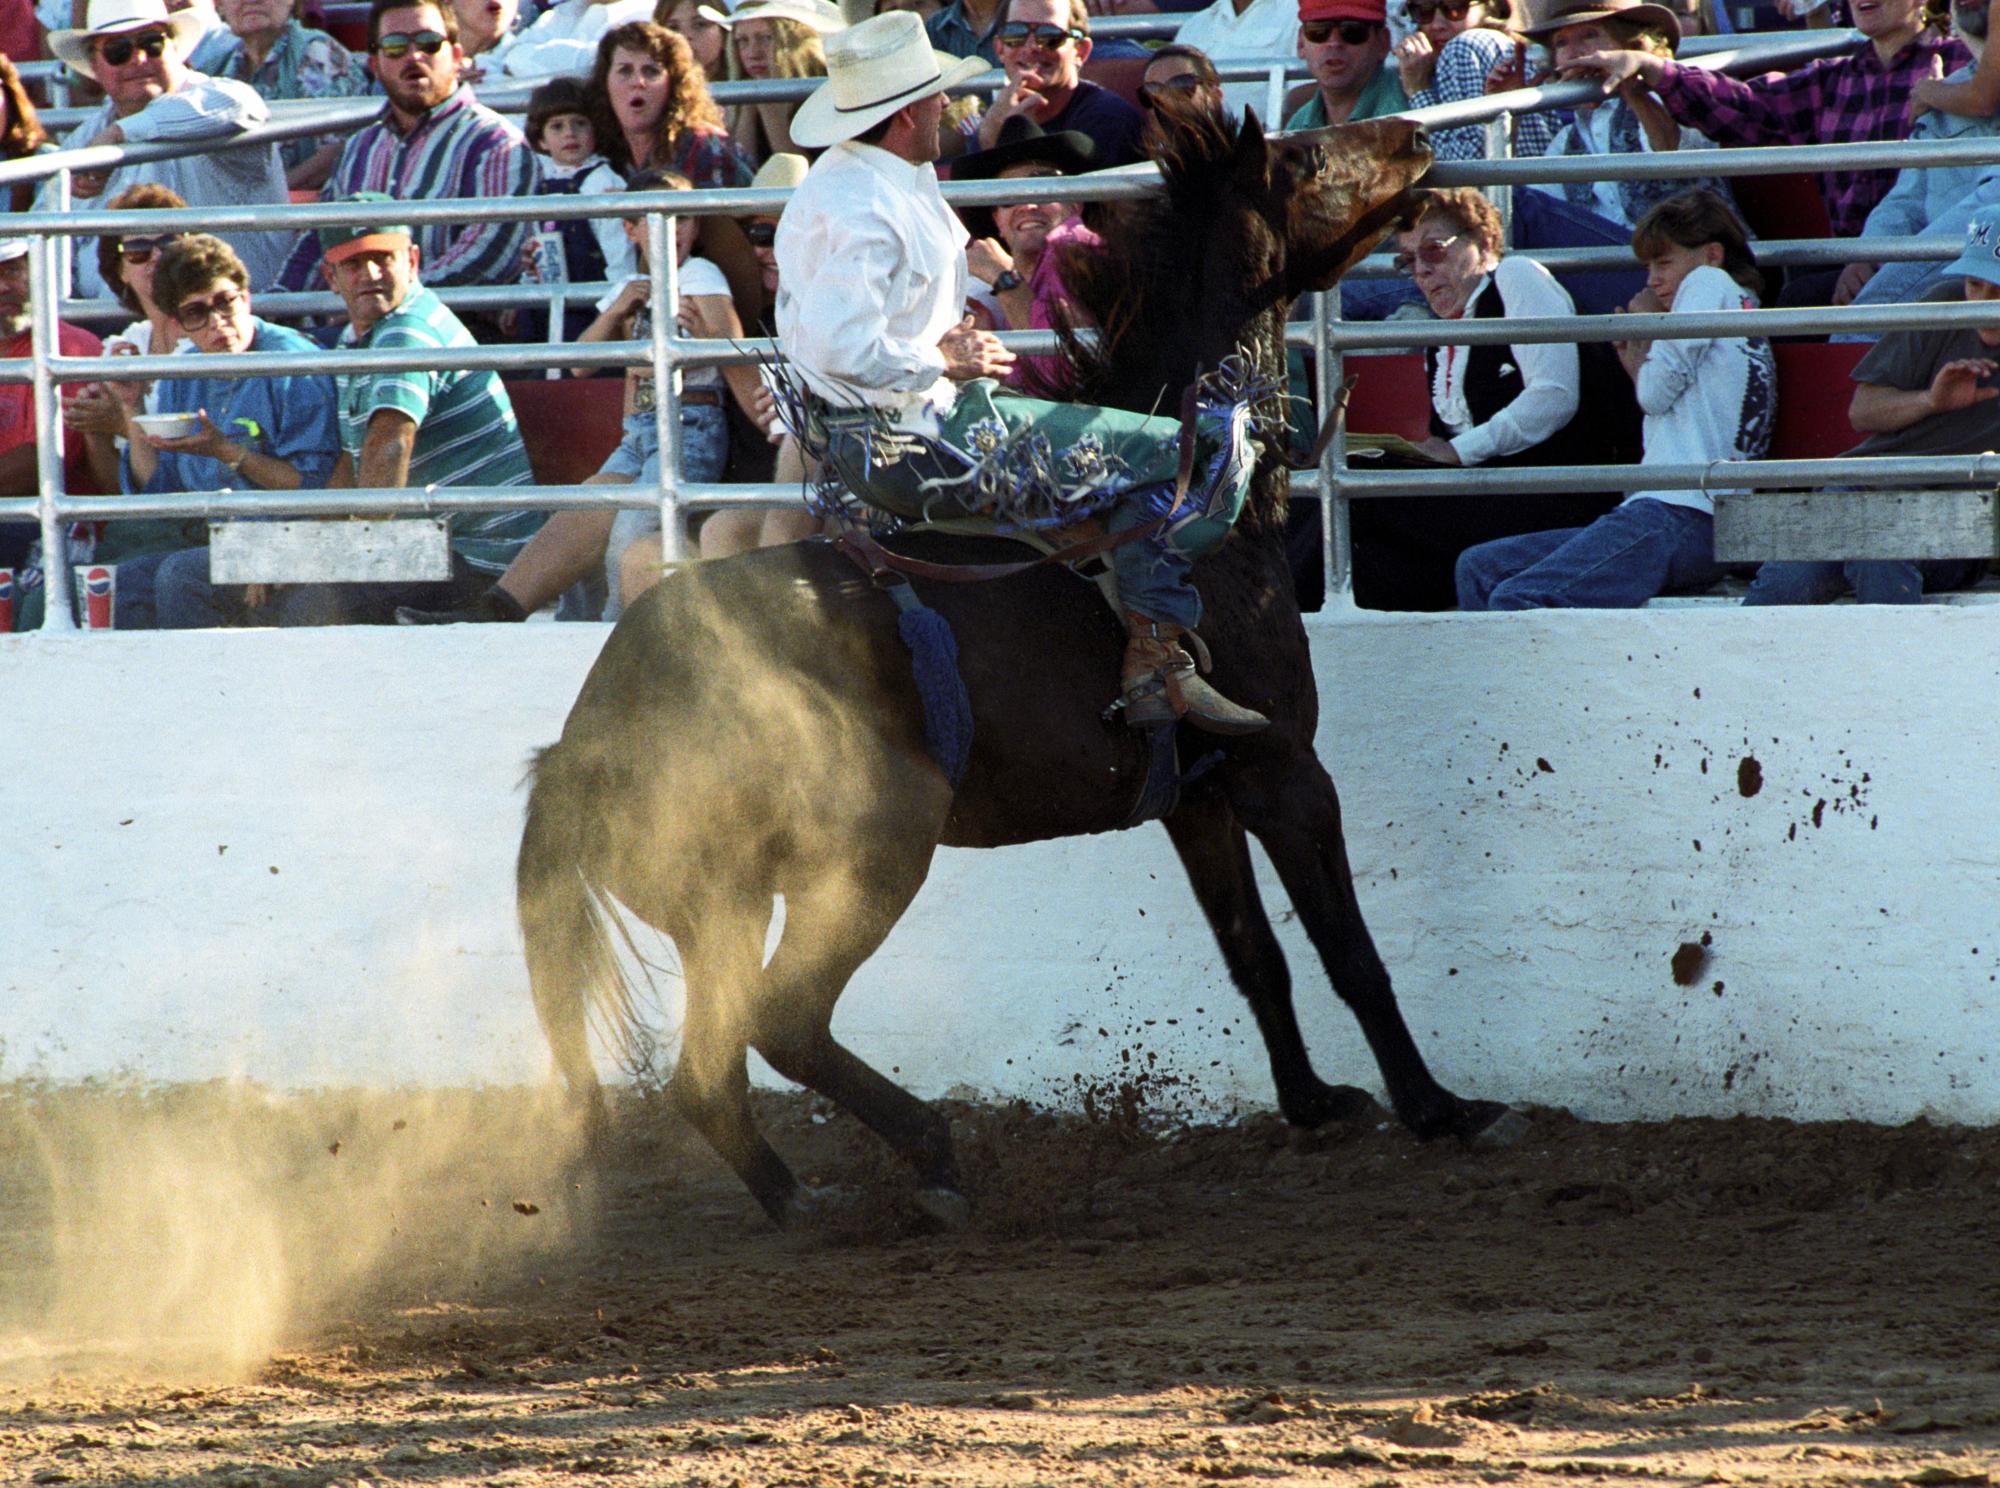 Imperial Valley Rodeo (1992) - Tough Hombre #1